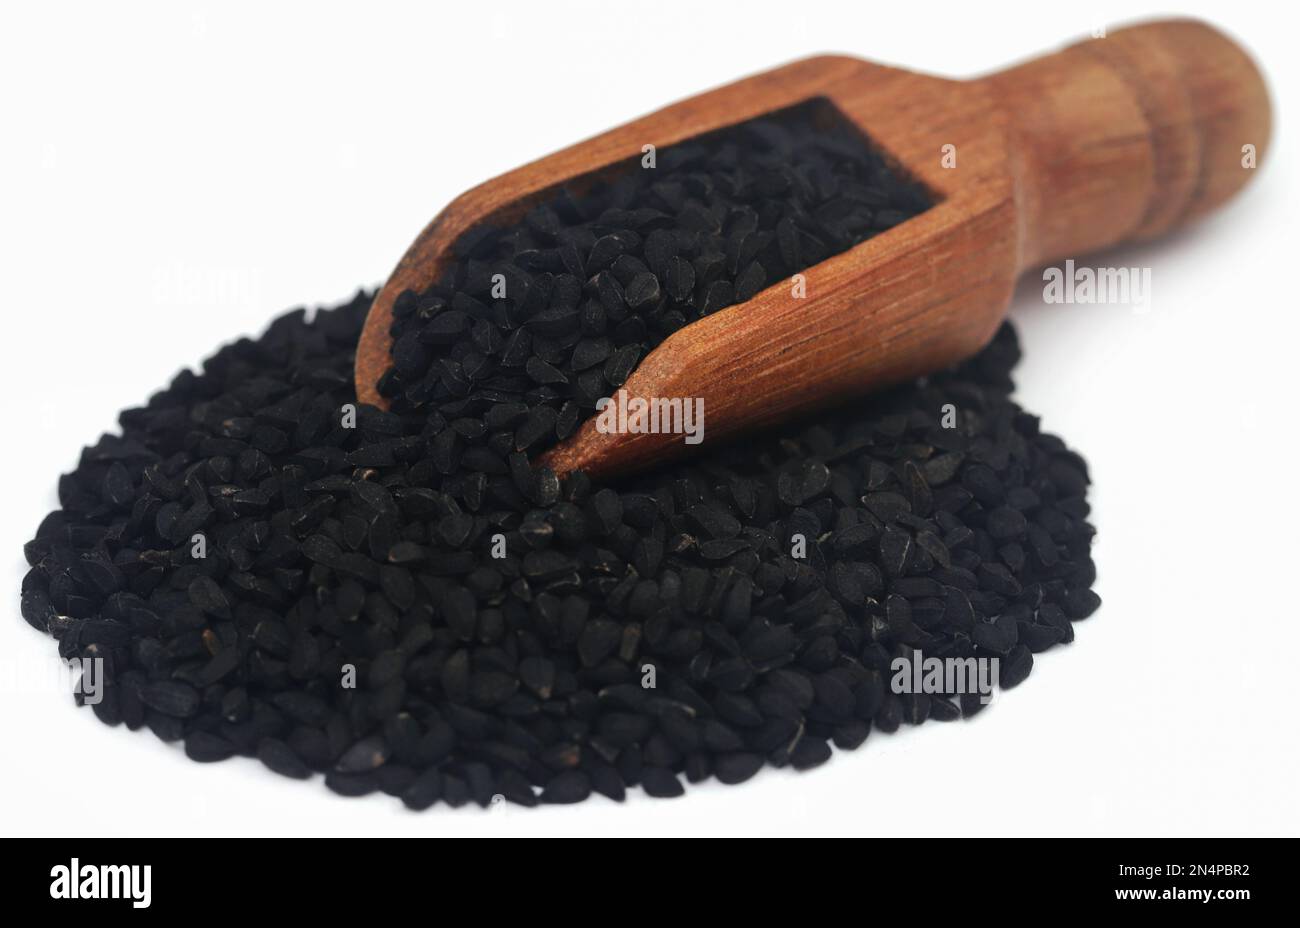 Nigella seeds with wooden scoop, over white background Stock Photo